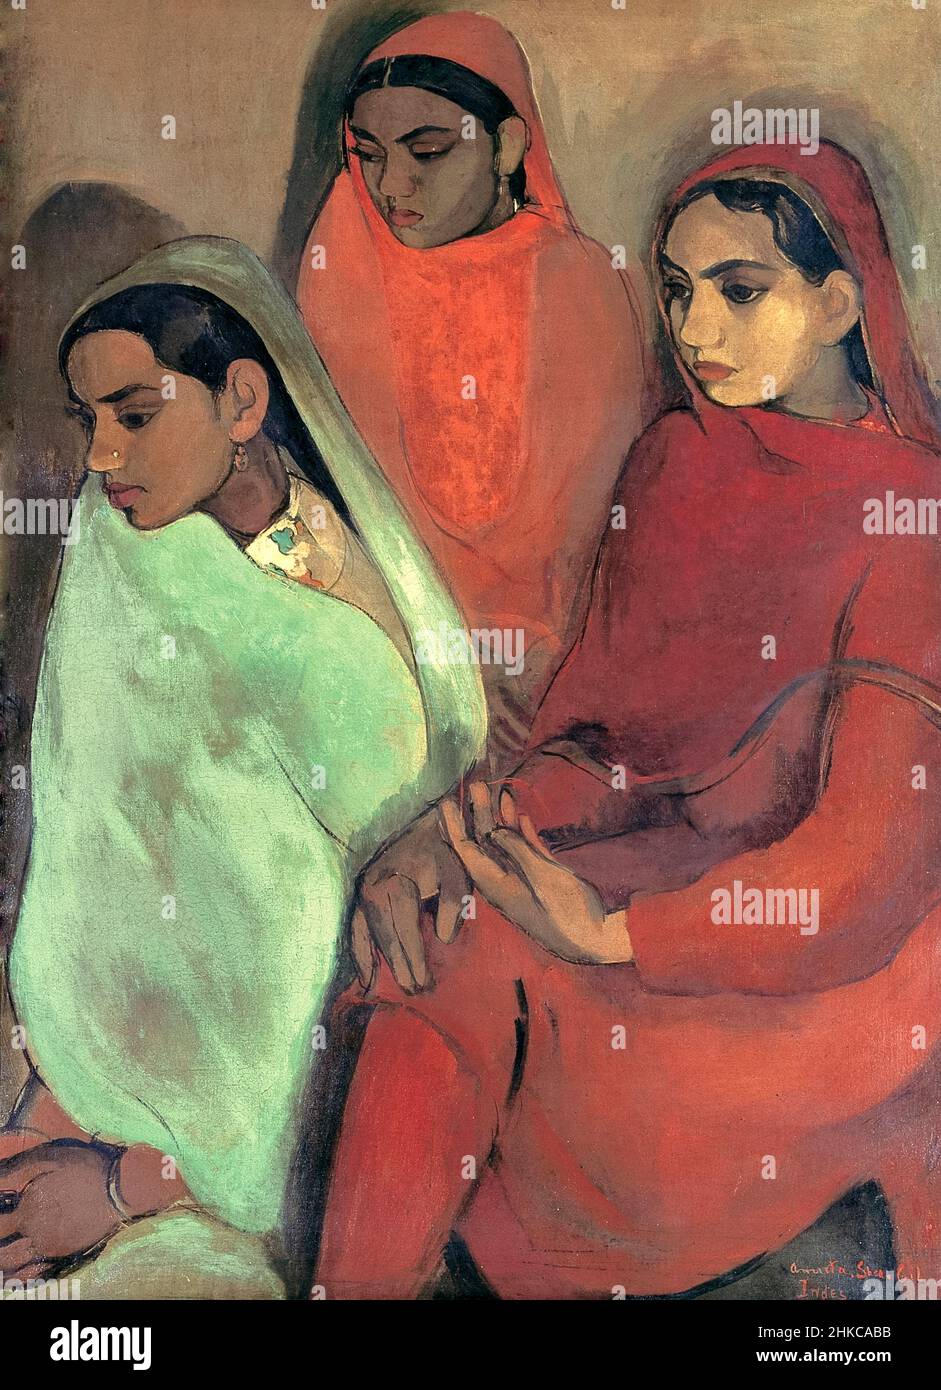 ‘Three Girls’ oil painting by Indian artist Amrita Sher-Gil (1913-1941) painted in 1935. Stock Photo